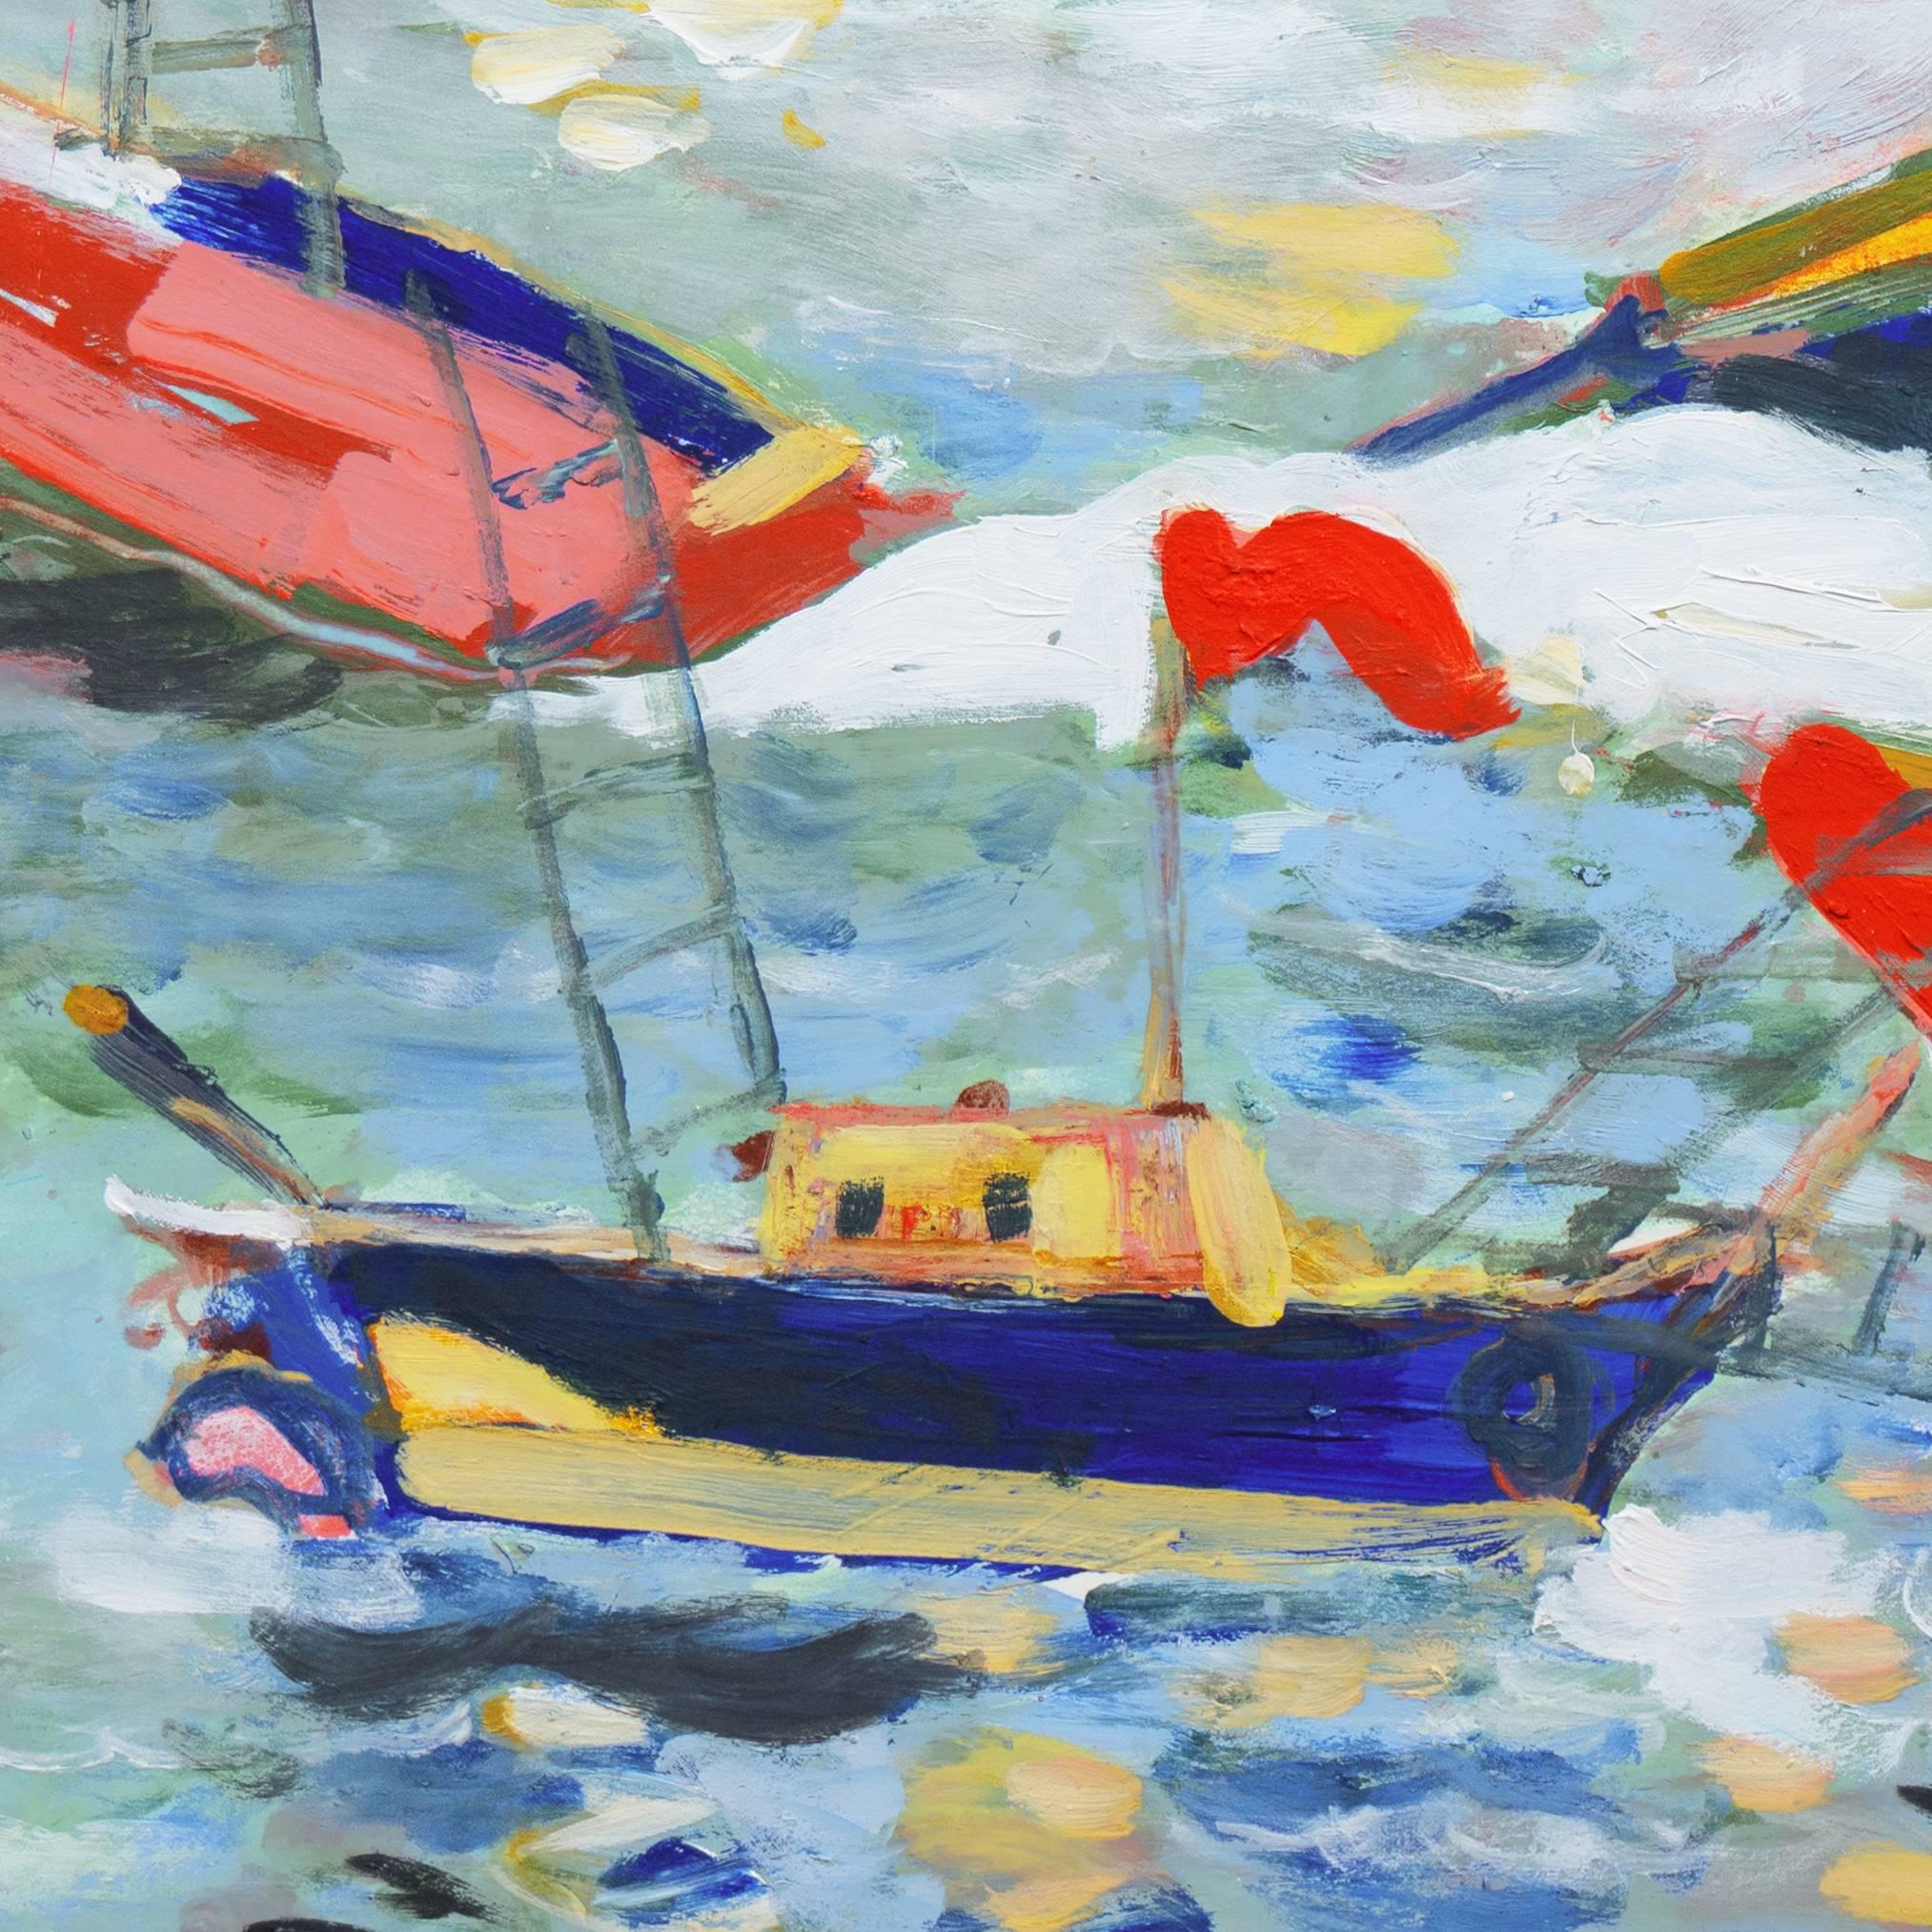 'Fishing Boats Off Monterey', Carmel, California Expressionist Seascape, Big Sur - Painting by Robert Canete